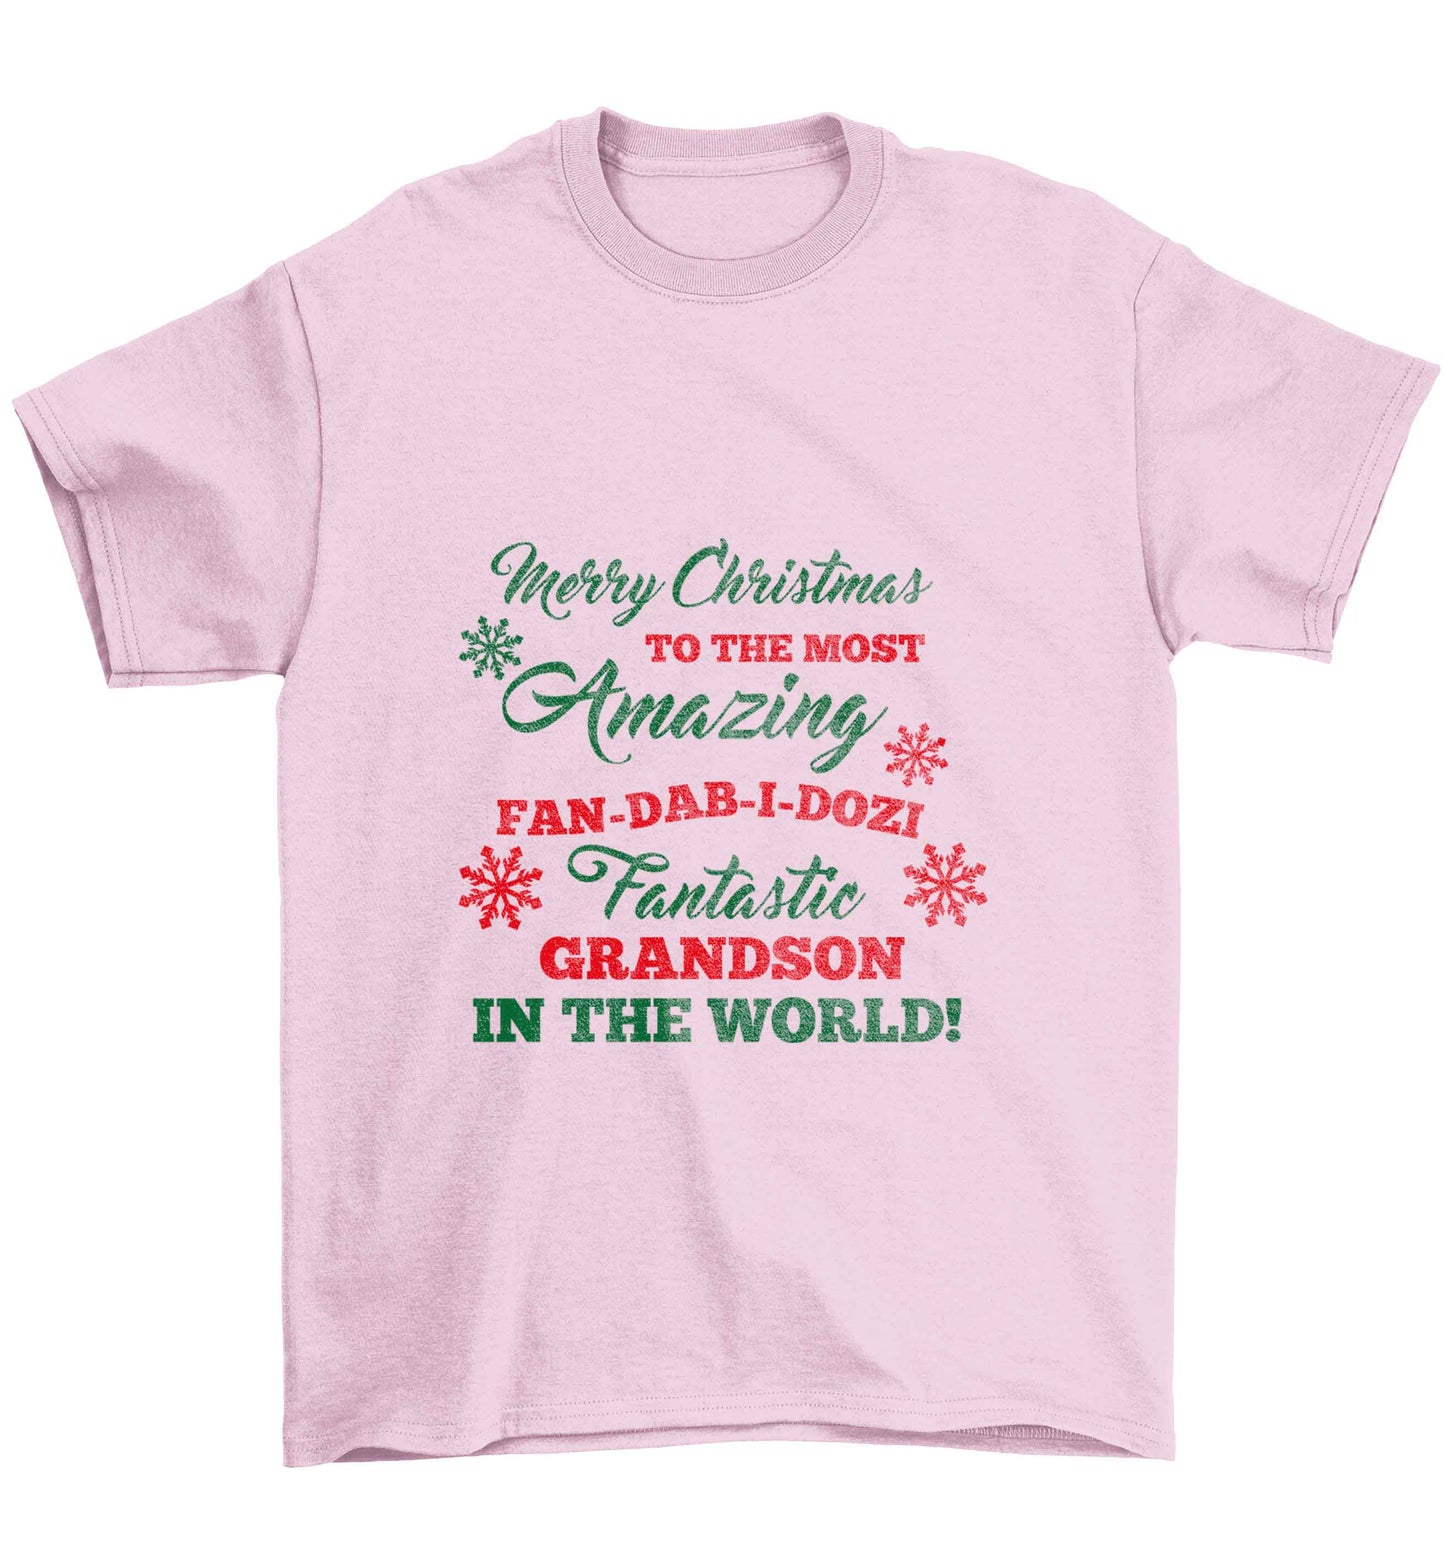 Merry Christmas to the most amazing fan-dab-i-dozi fantasic Grandson in the world Children's light pink Tshirt 12-13 Years